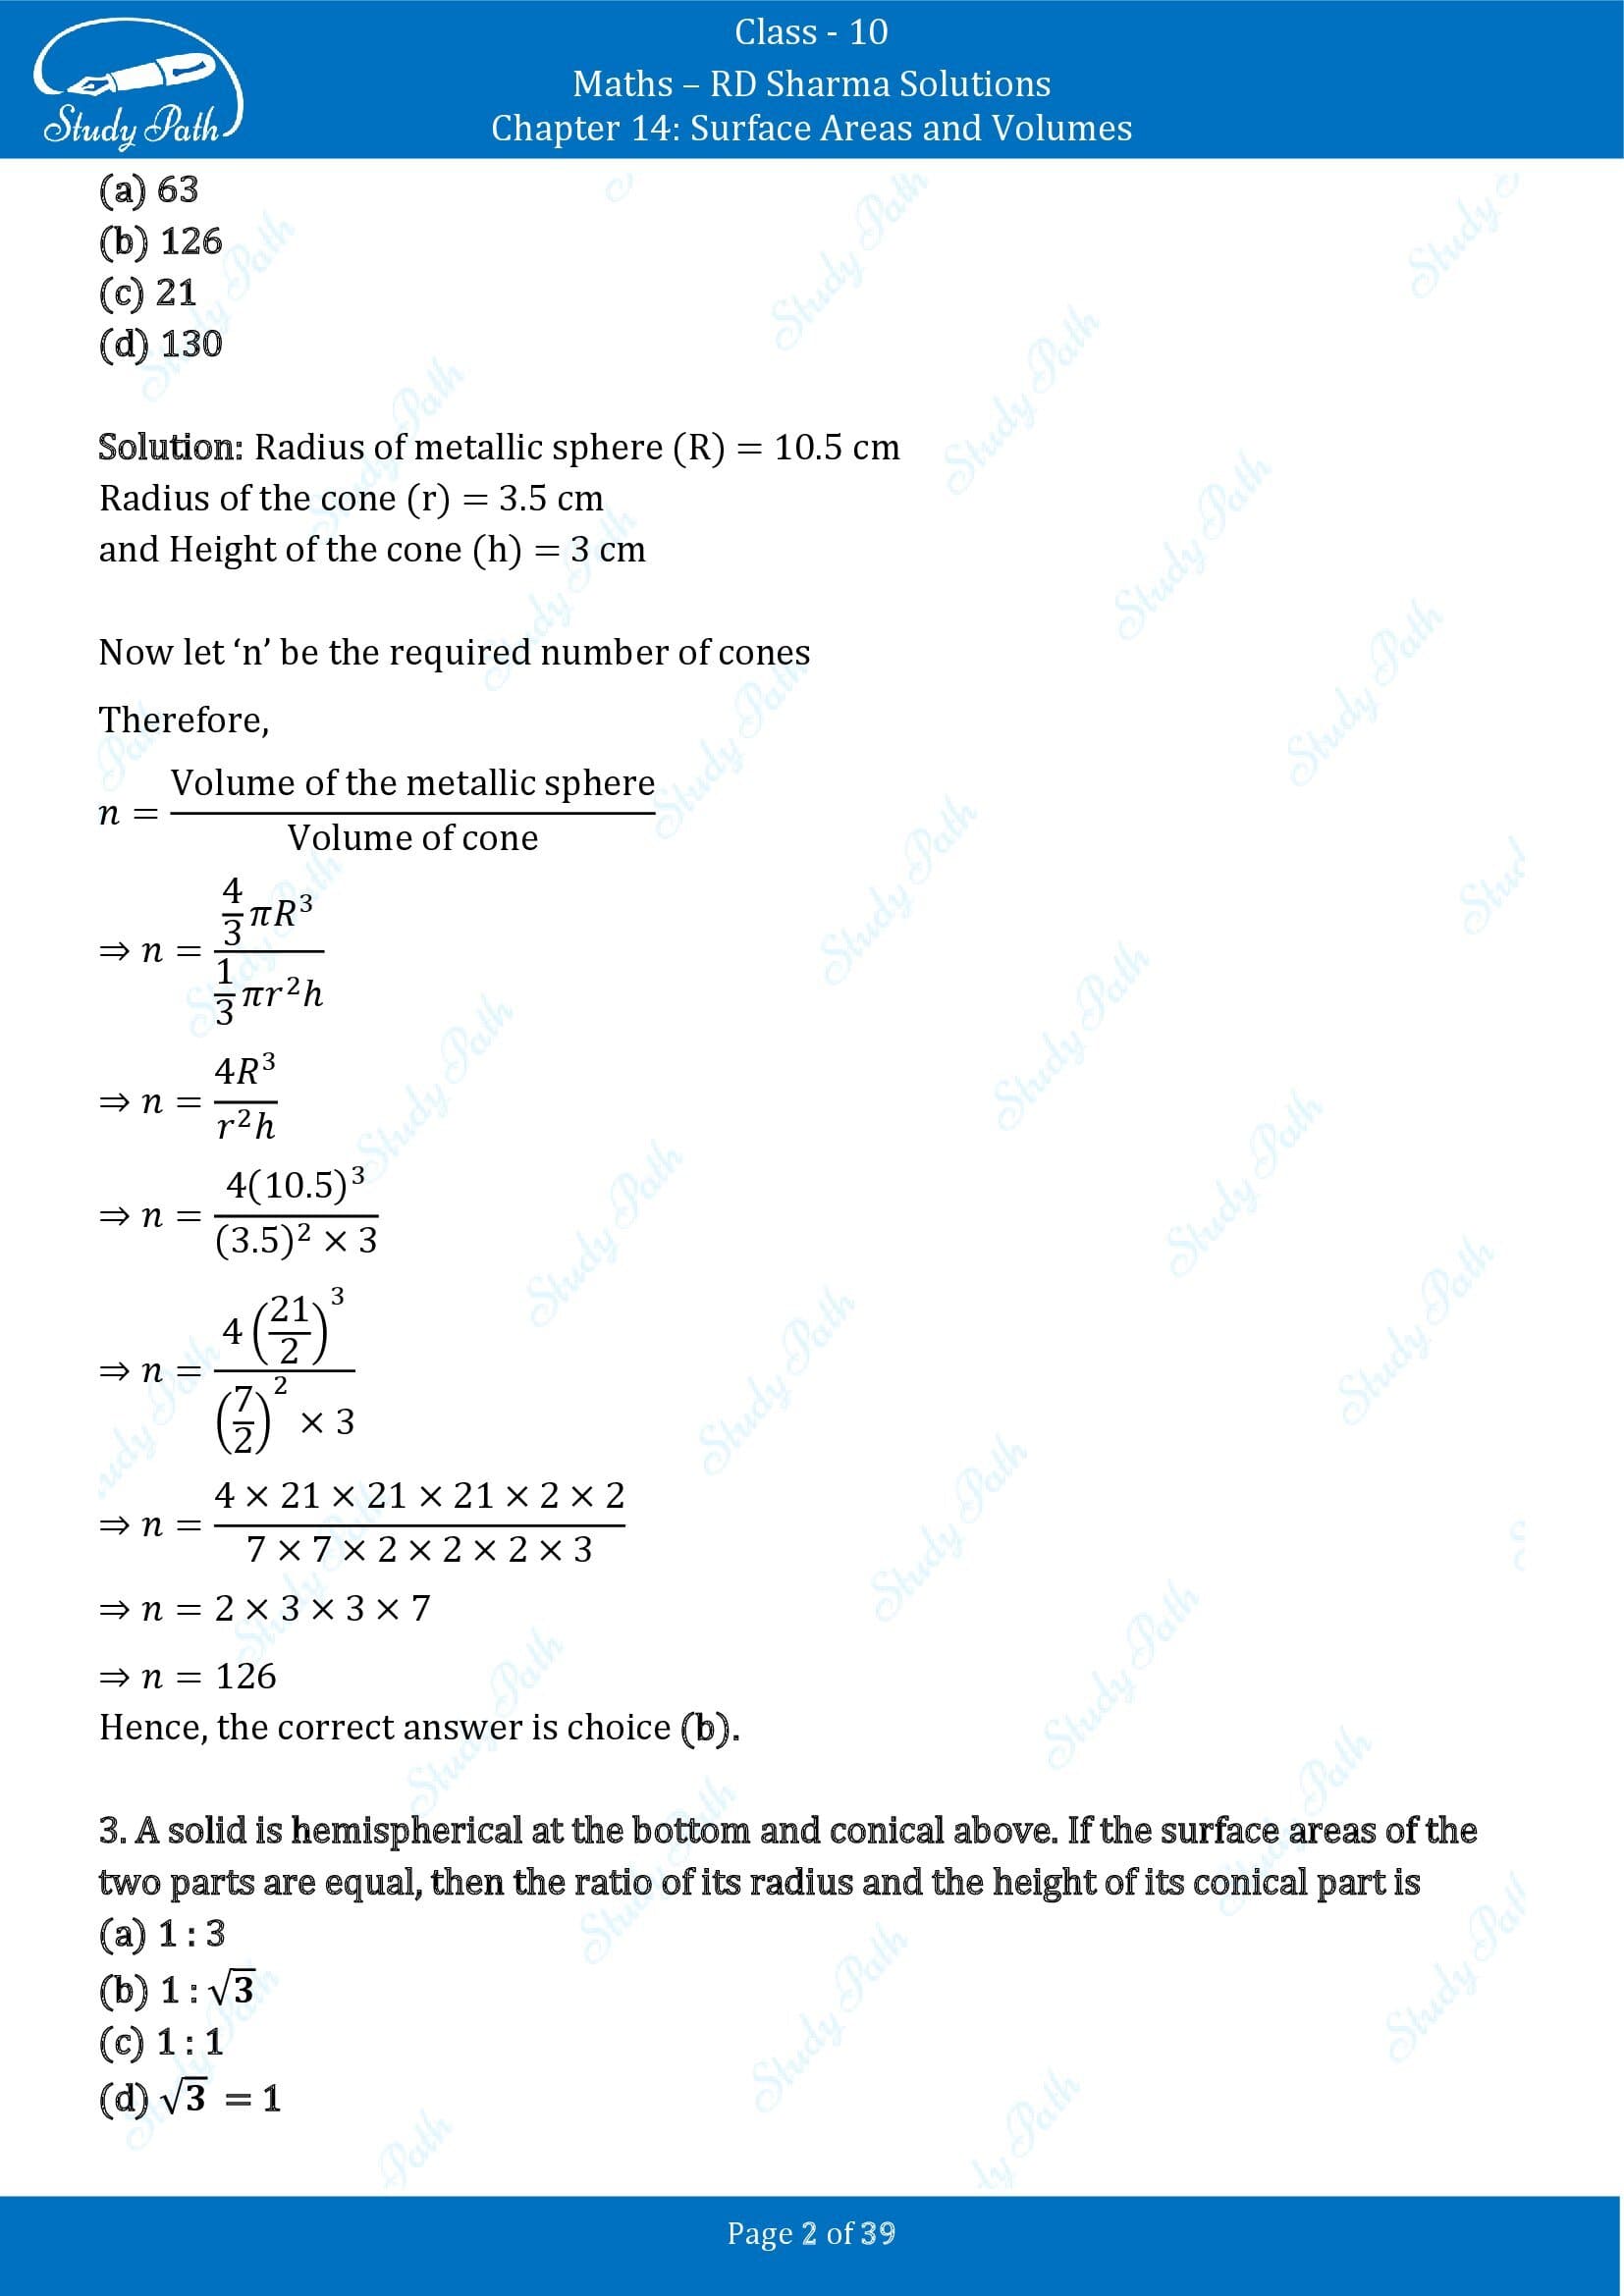 RD Sharma Solutions Class 10 Chapter 14 Surface Areas and Volumes Multiple Choice Question MCQs 00002